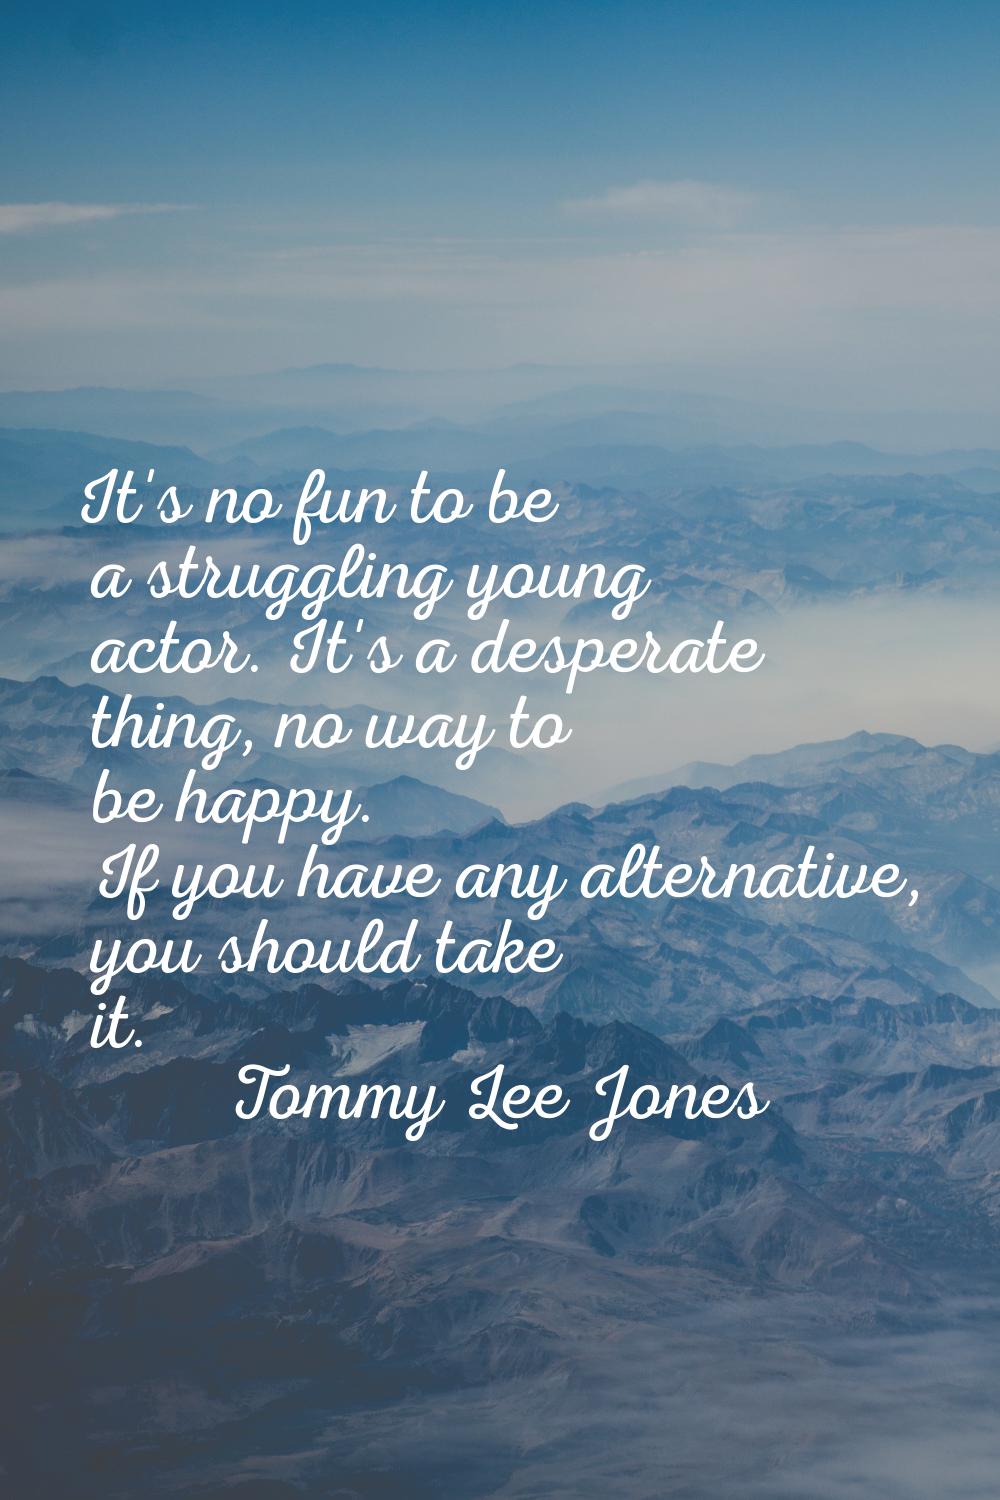 It's no fun to be a struggling young actor. It's a desperate thing, no way to be happy. If you have